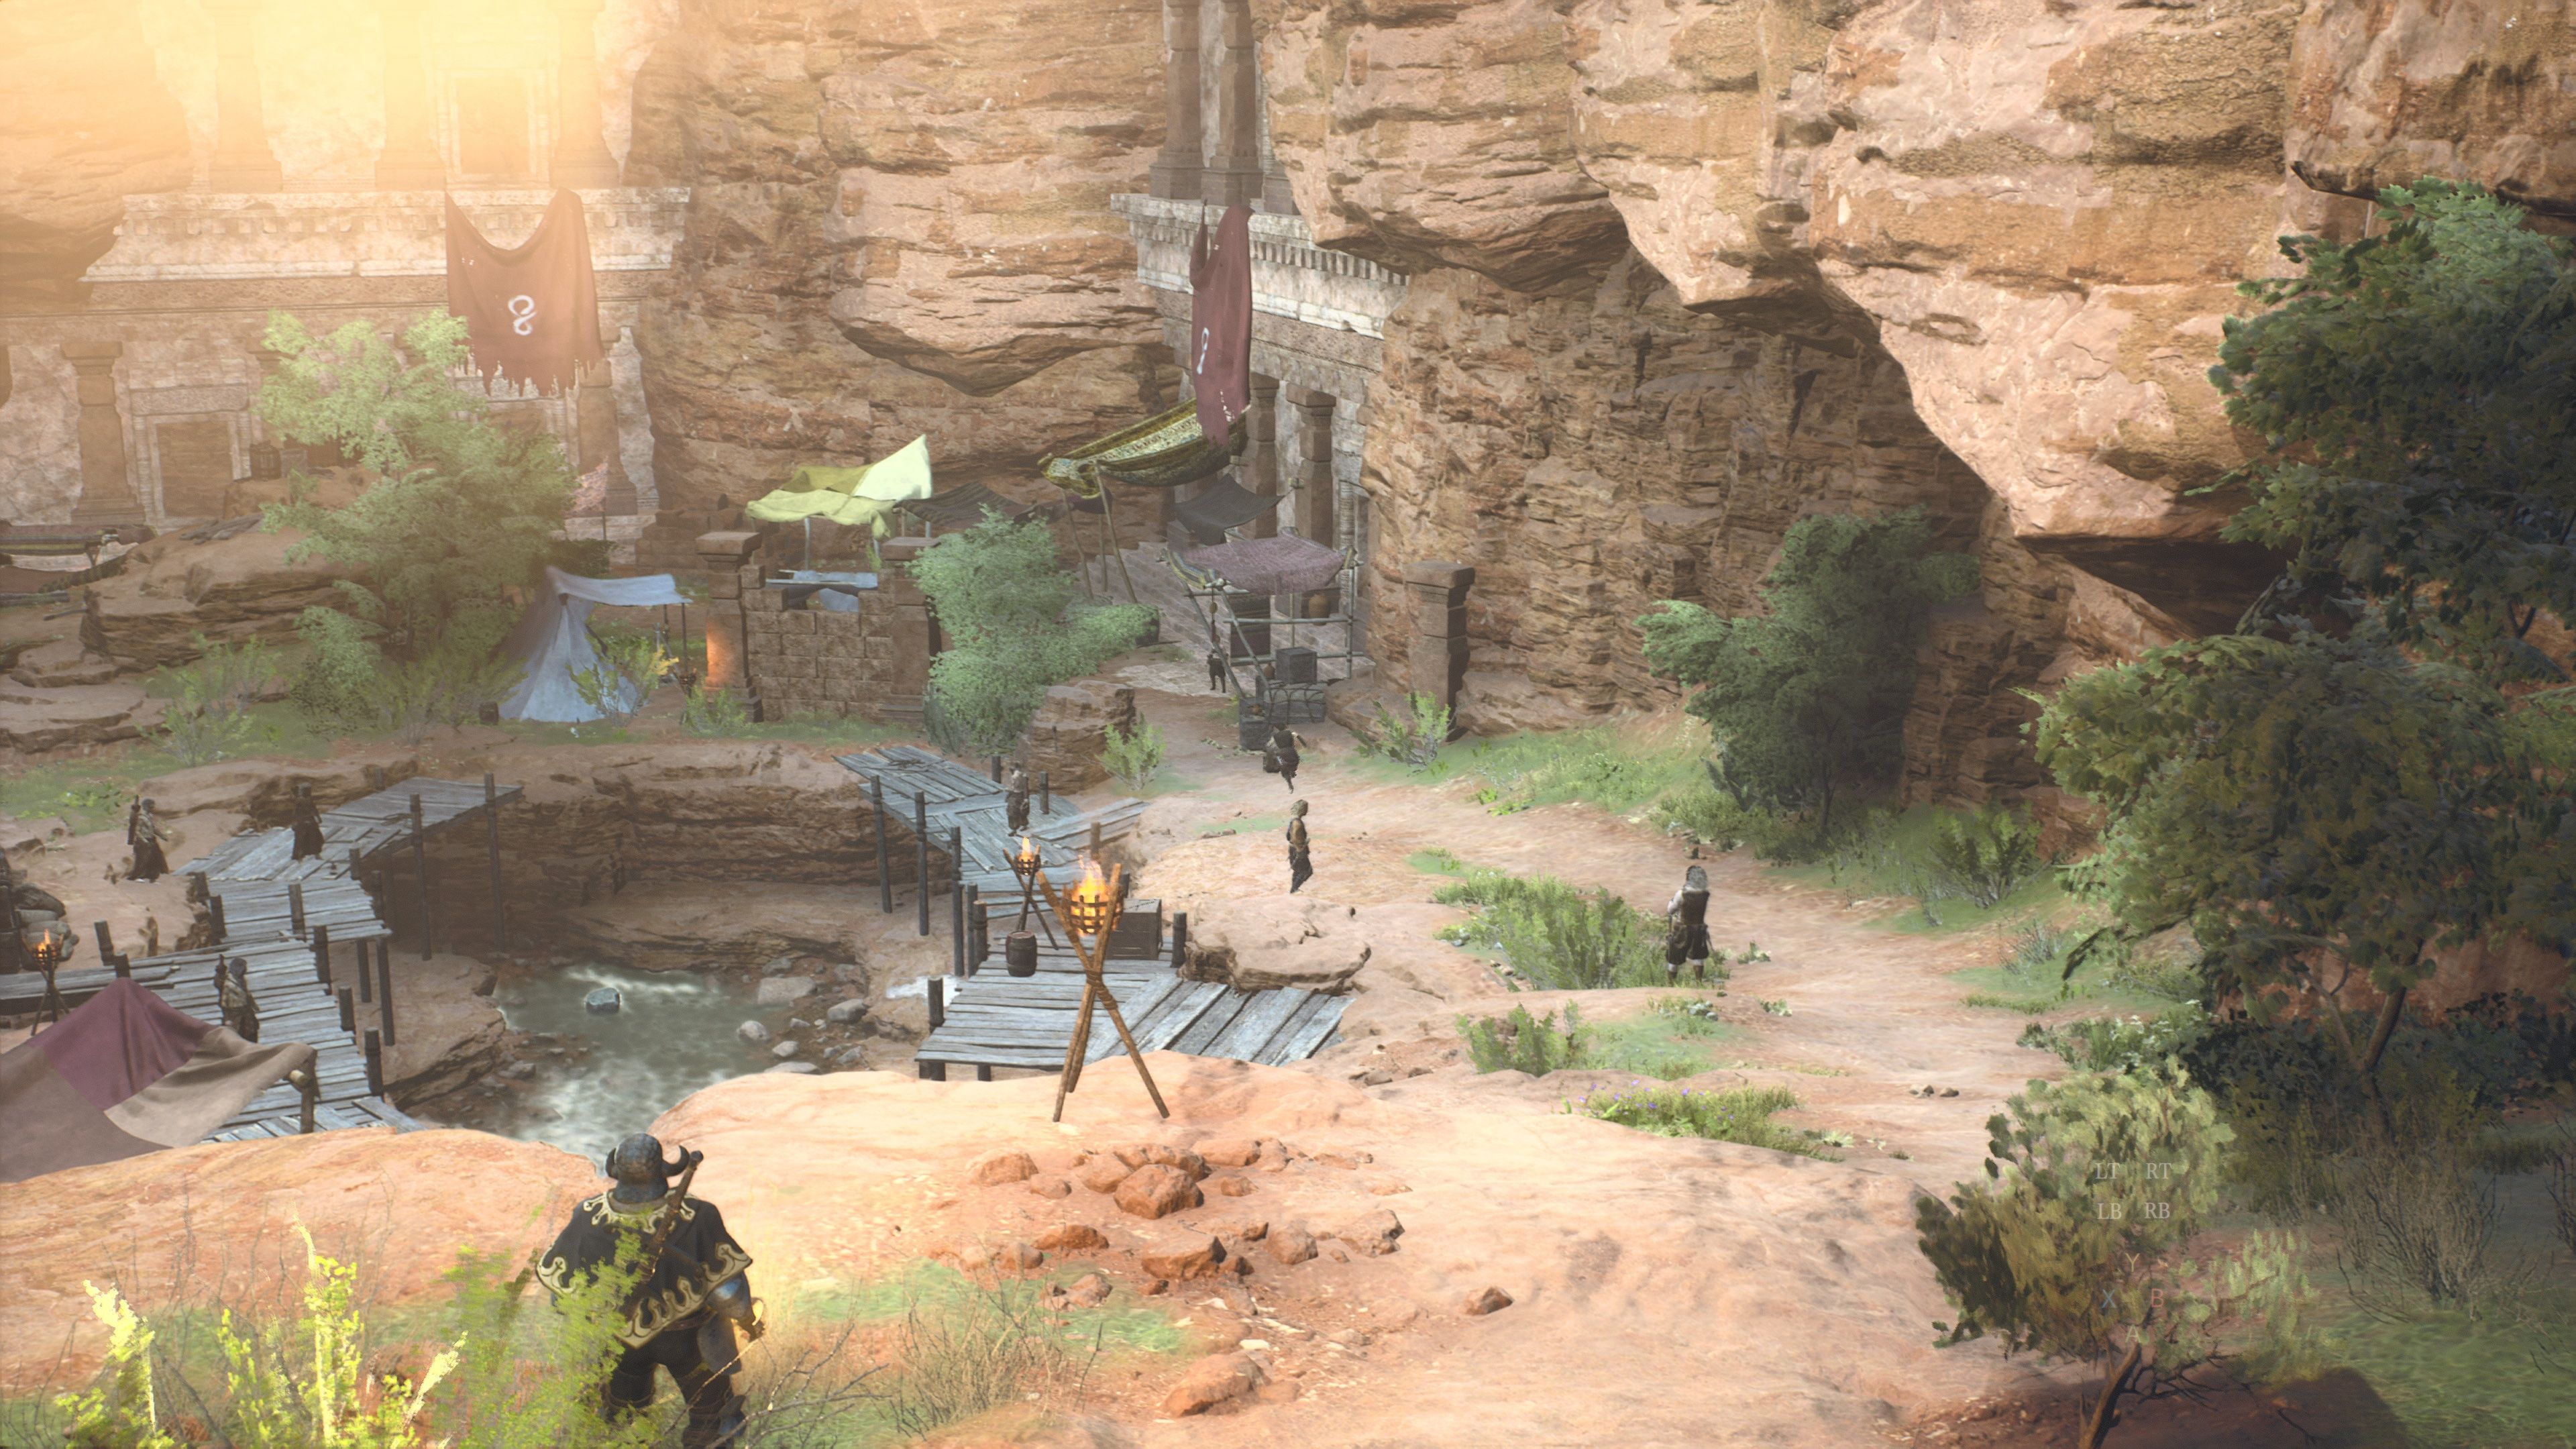 The Coral Snakes' Hideout during Mercy among Thieves in Dragon's Dogma 2.